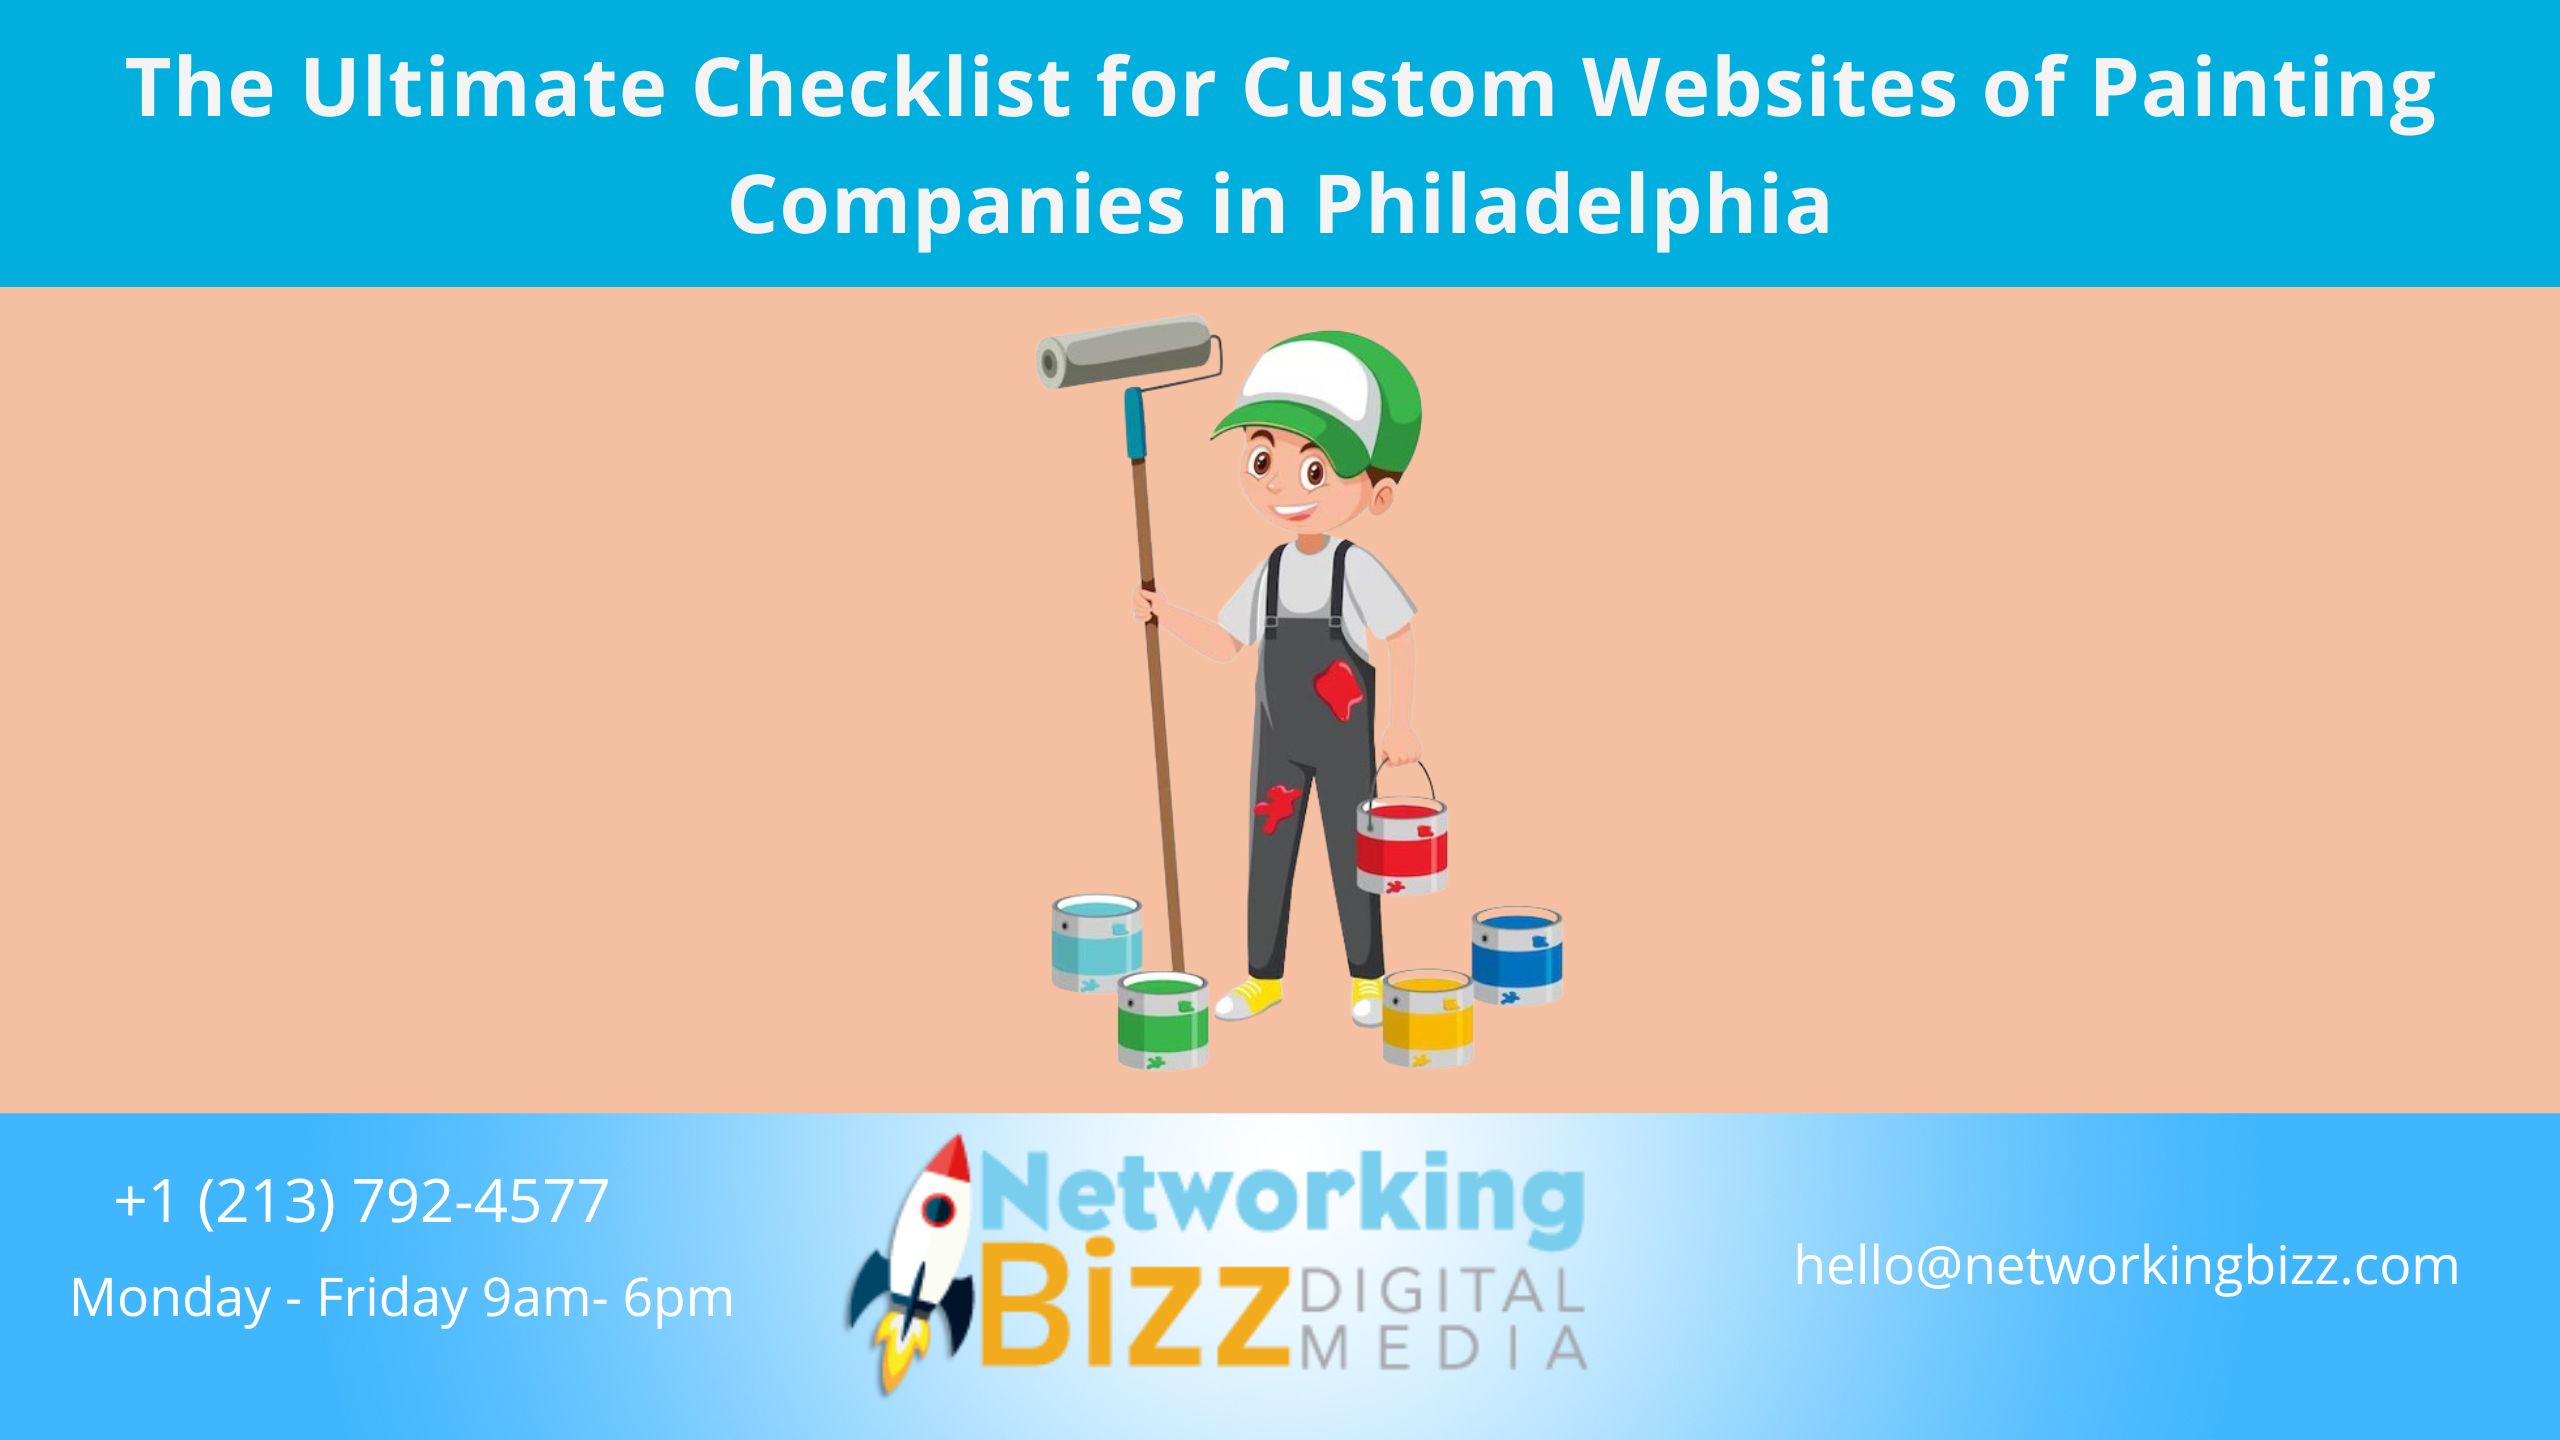 The Ultimate Checklist for Custom Websites of Painting Companies in Philadelphia